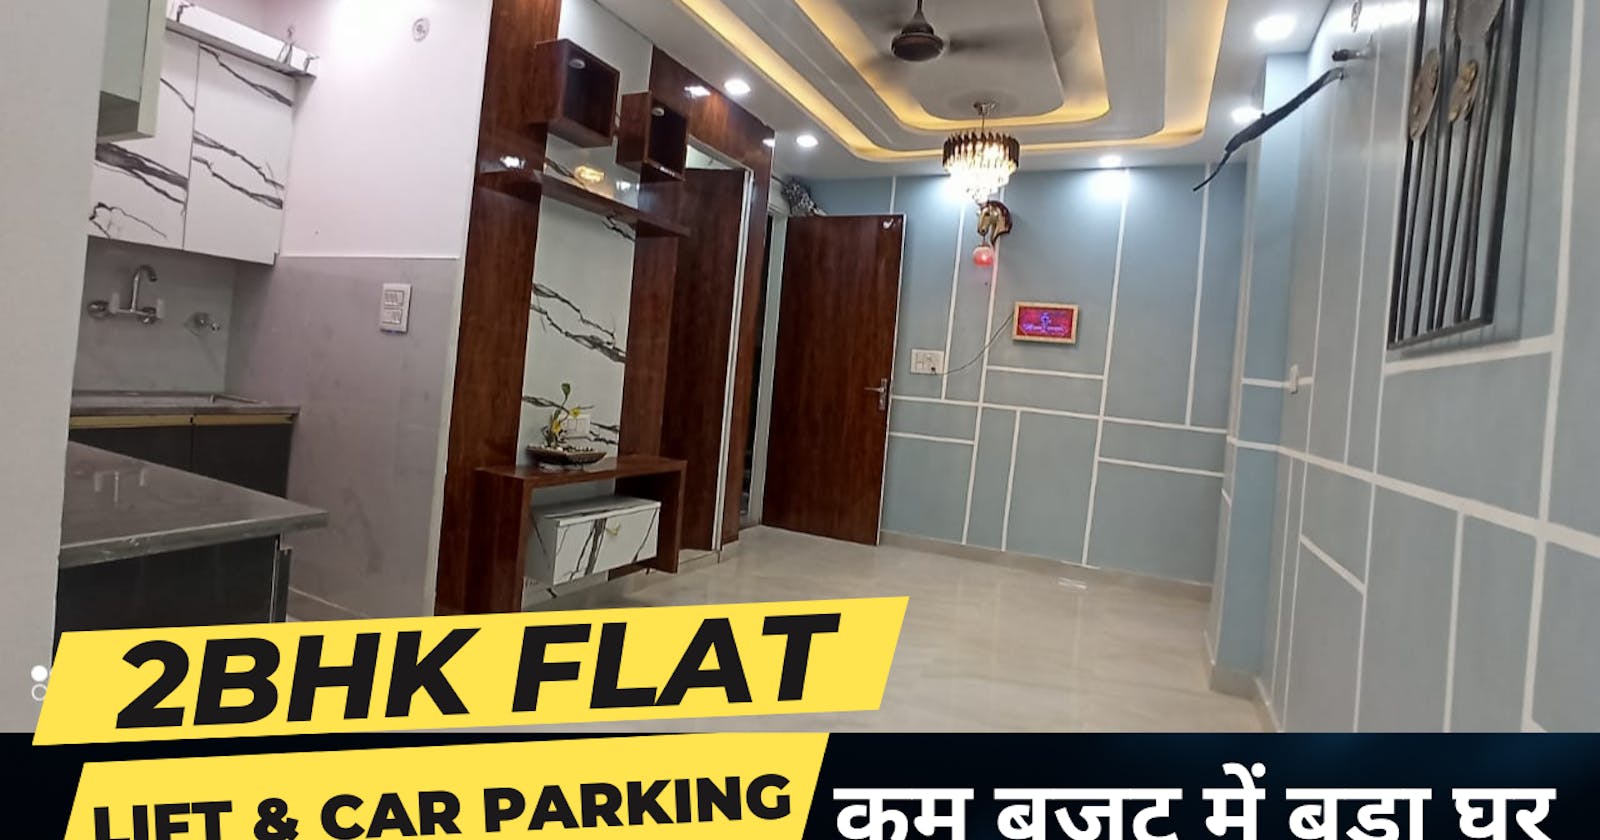 Buy a 2 BHK flat in Delhi you can follow these steps